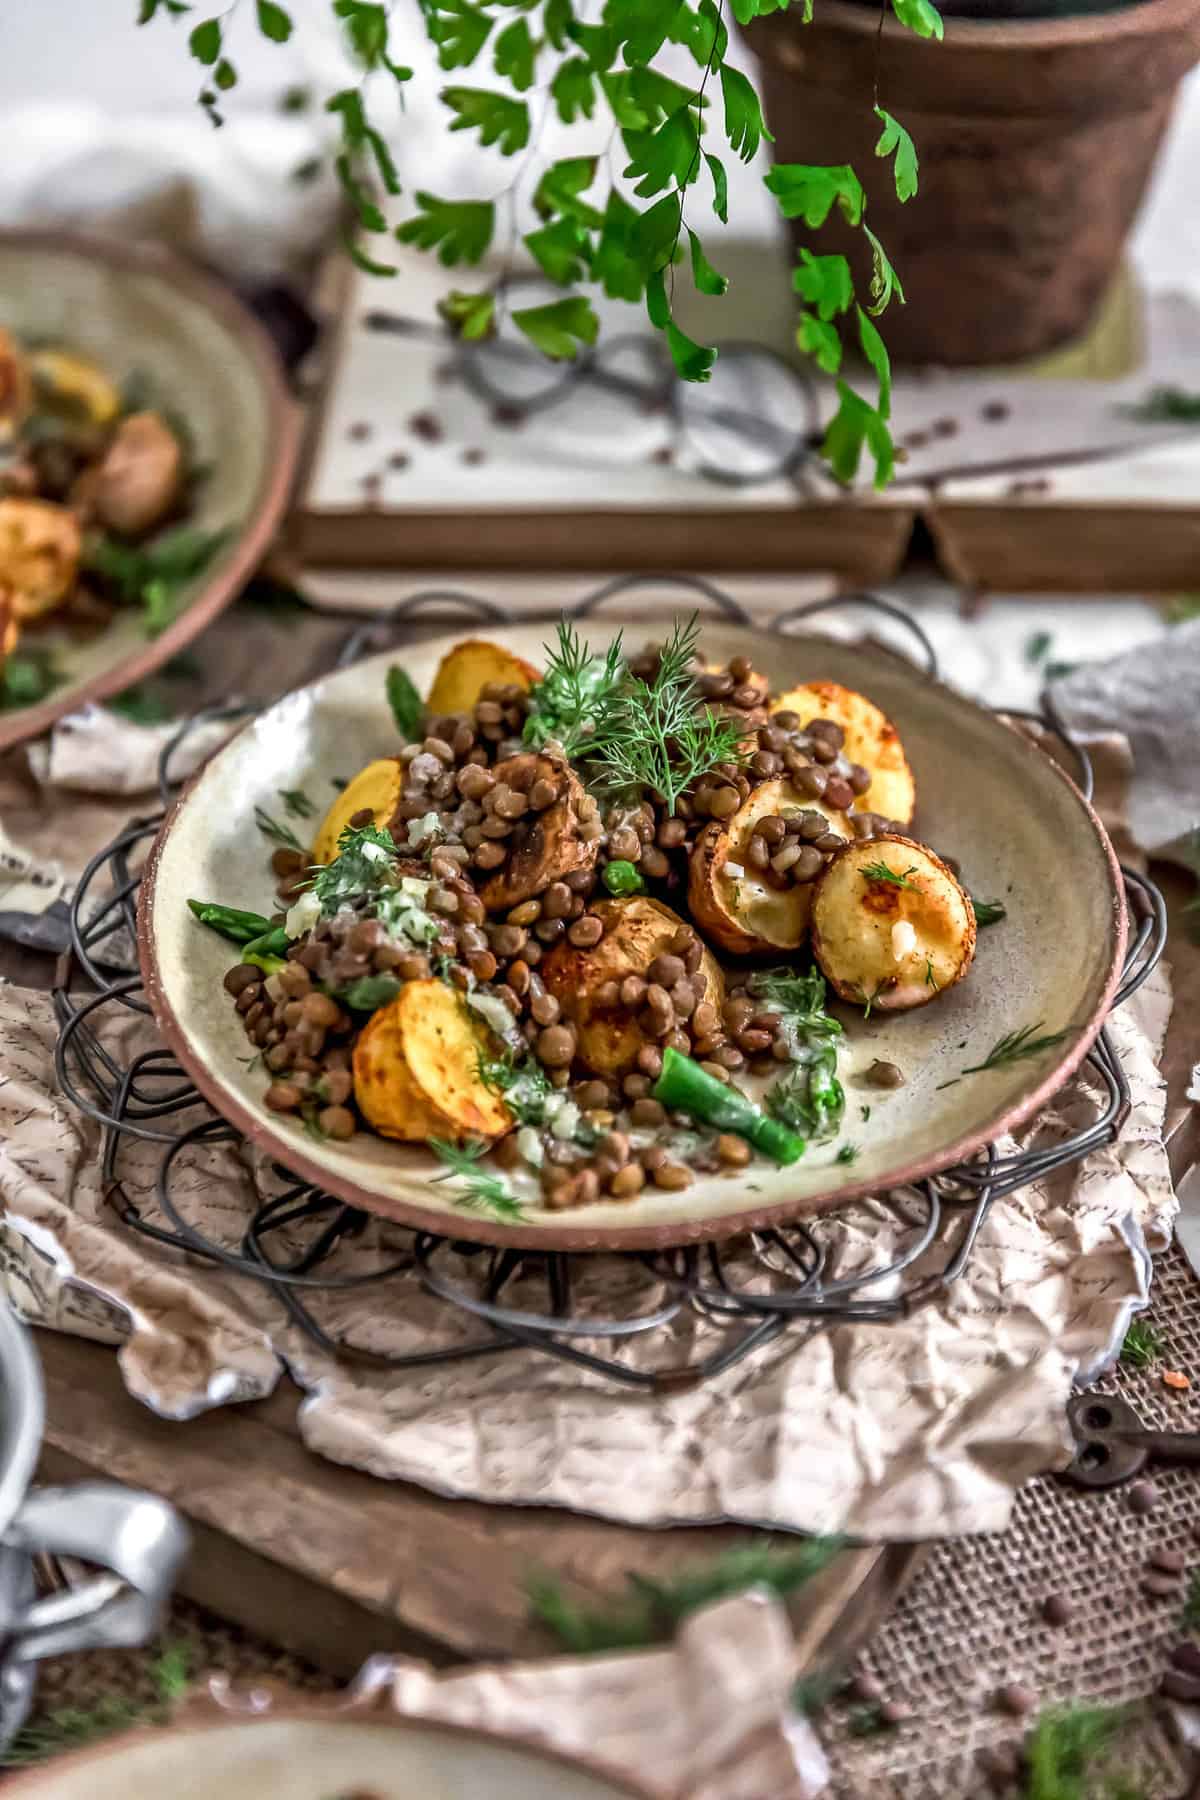 Roasted Potatoes with Seasoned Lentils and Dill Sauce